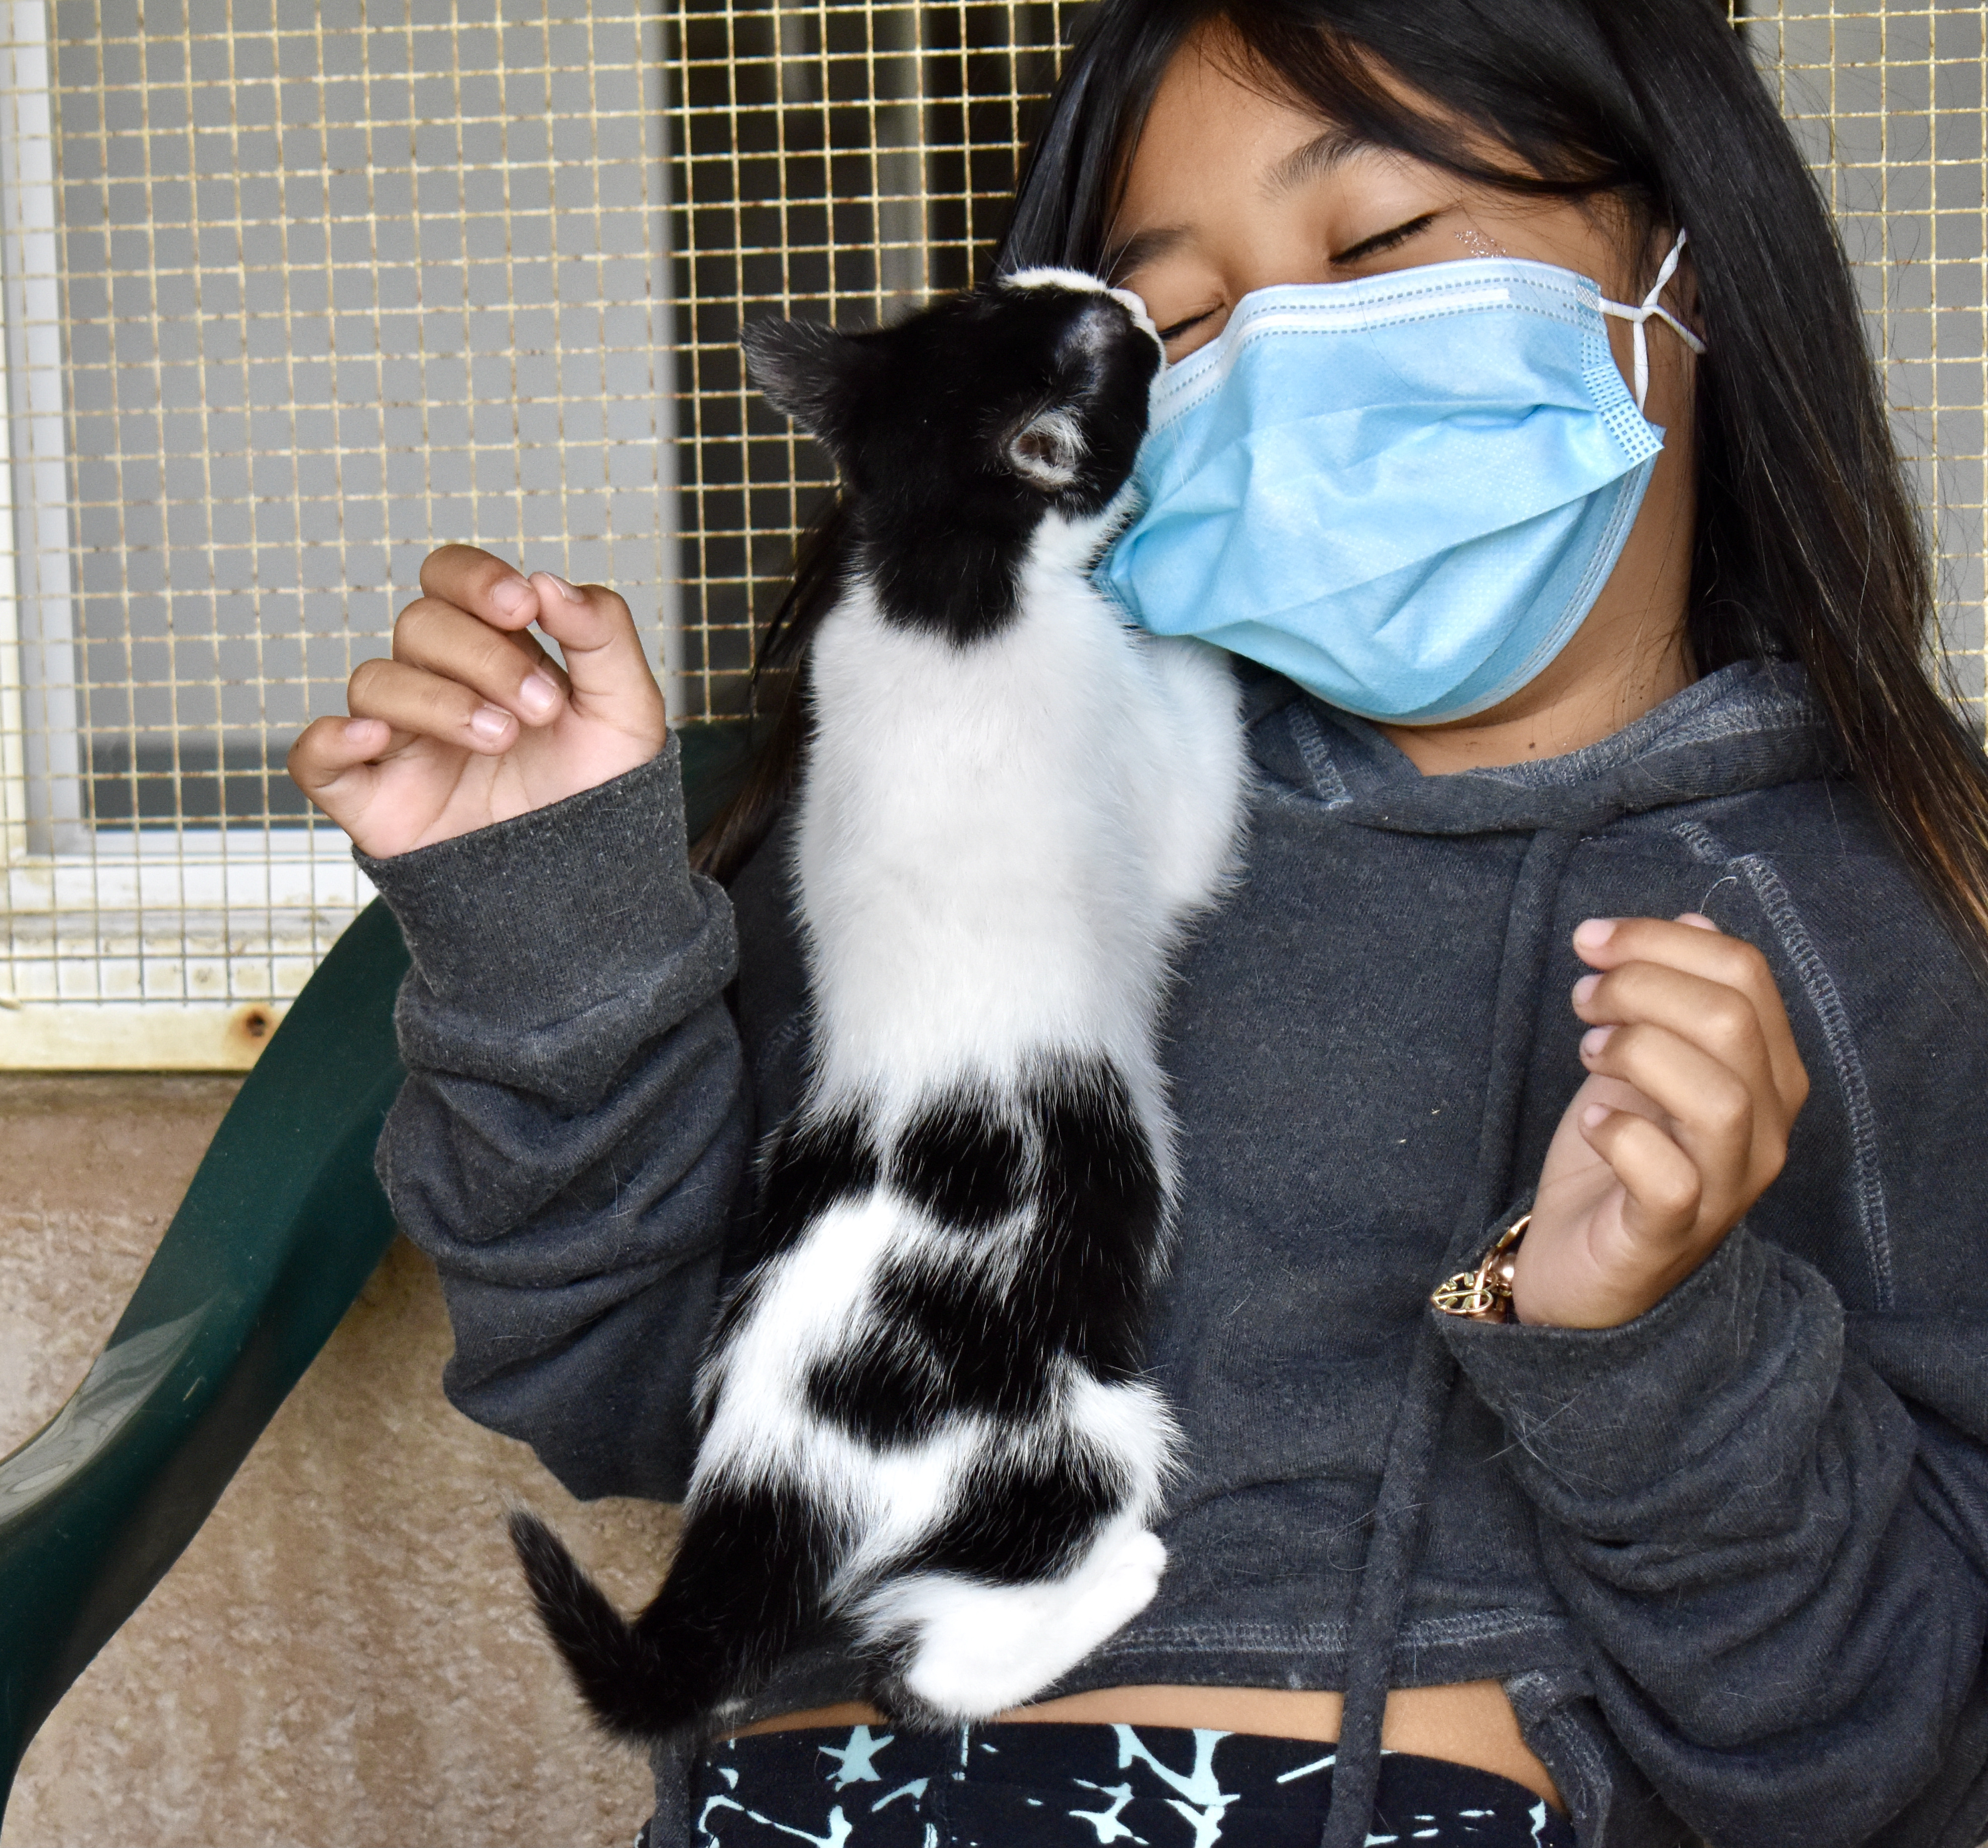 A volunteer playing with a kitten to get her photo.